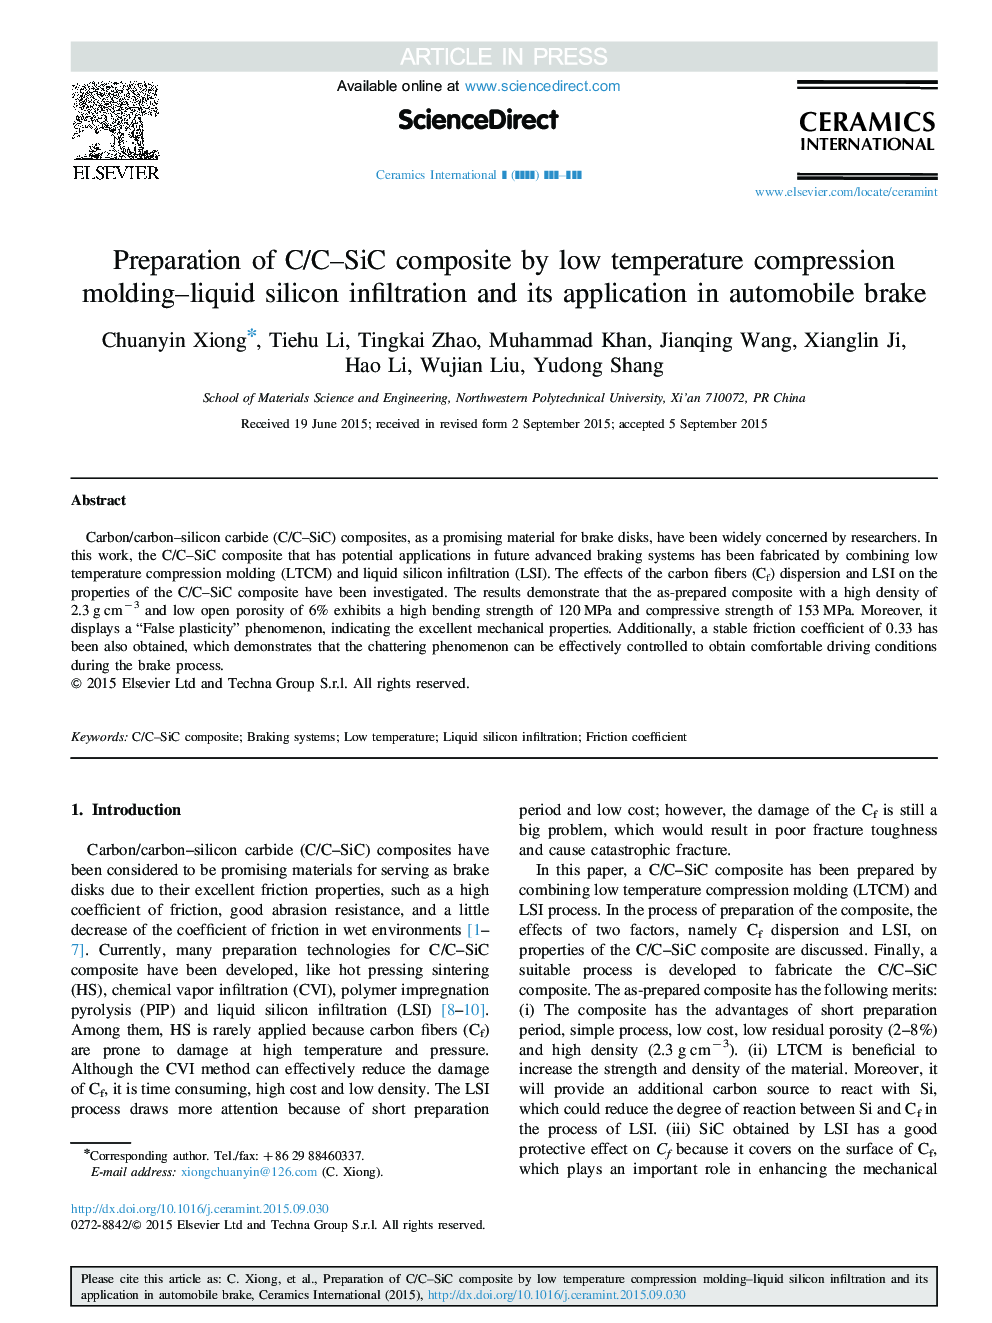 Preparation of C/C-SiC composite by low temperature compression molding-liquid silicon infiltration and its application in automobile brake